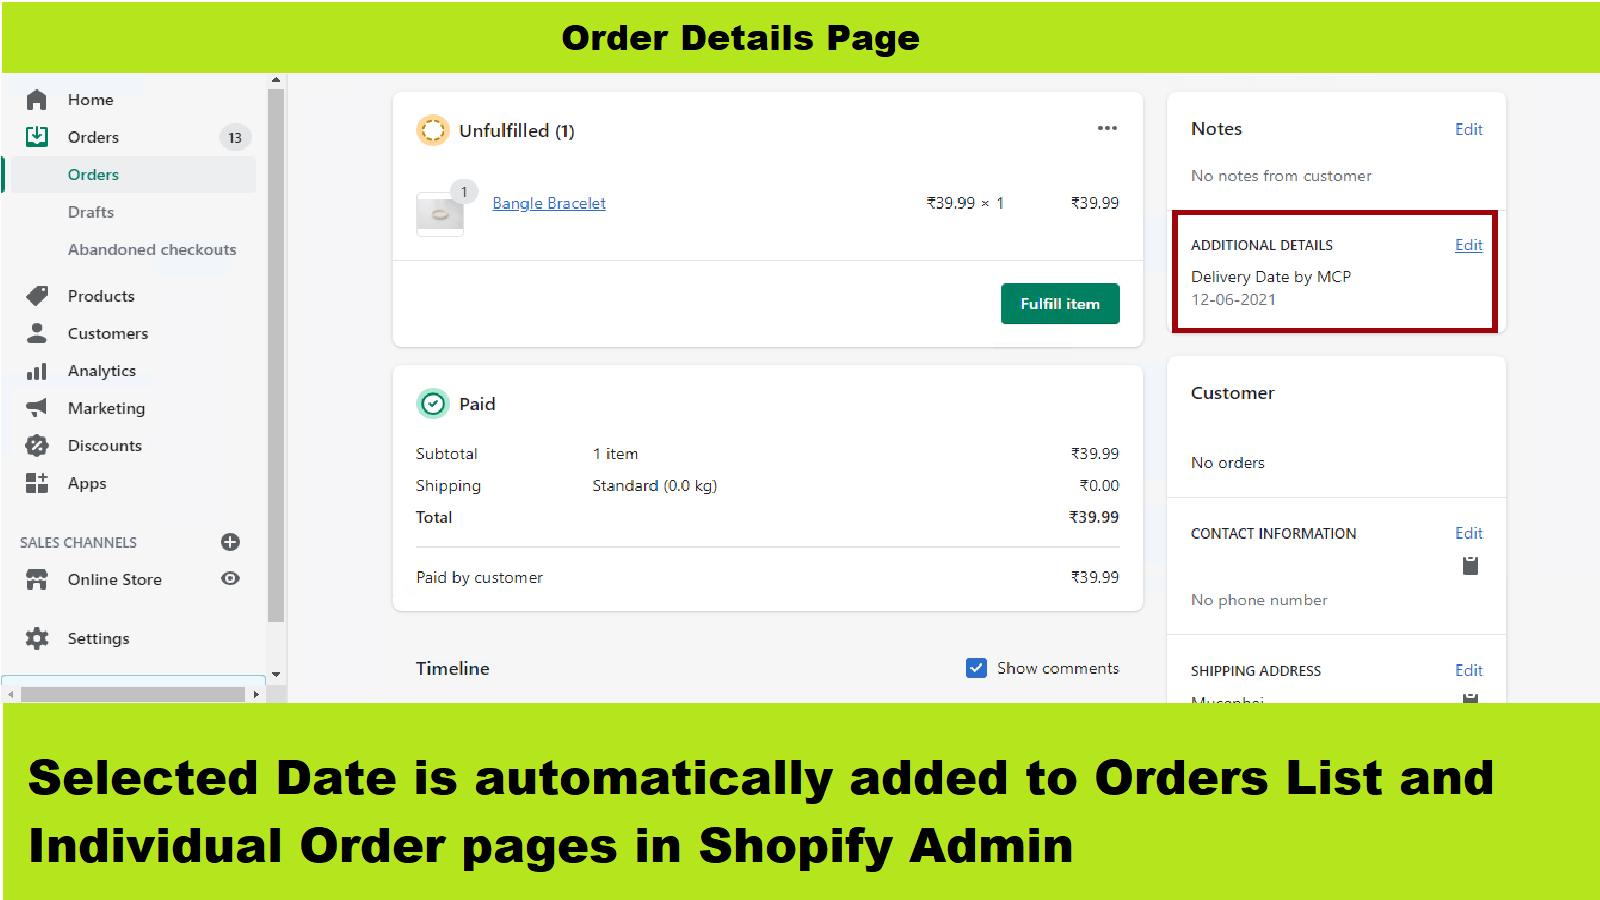 Selected Date is added to Orders page and list in Shopify Admin